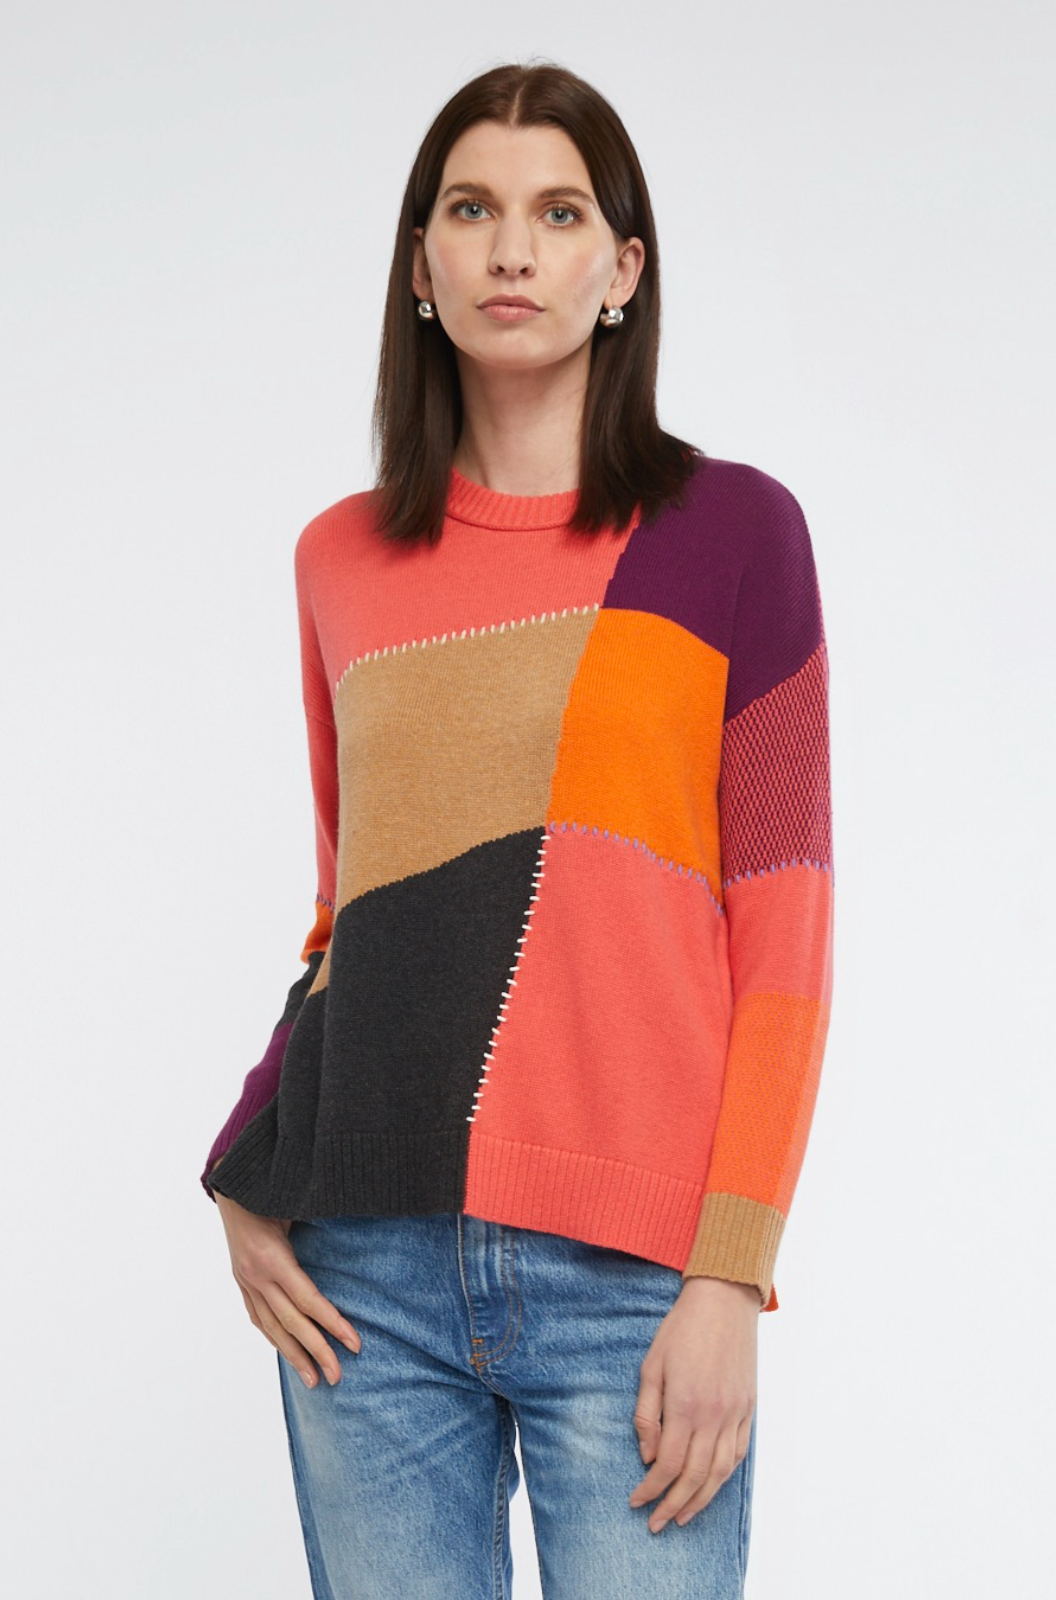 Zaket and Plover Patchwork Jumper in Dubarry